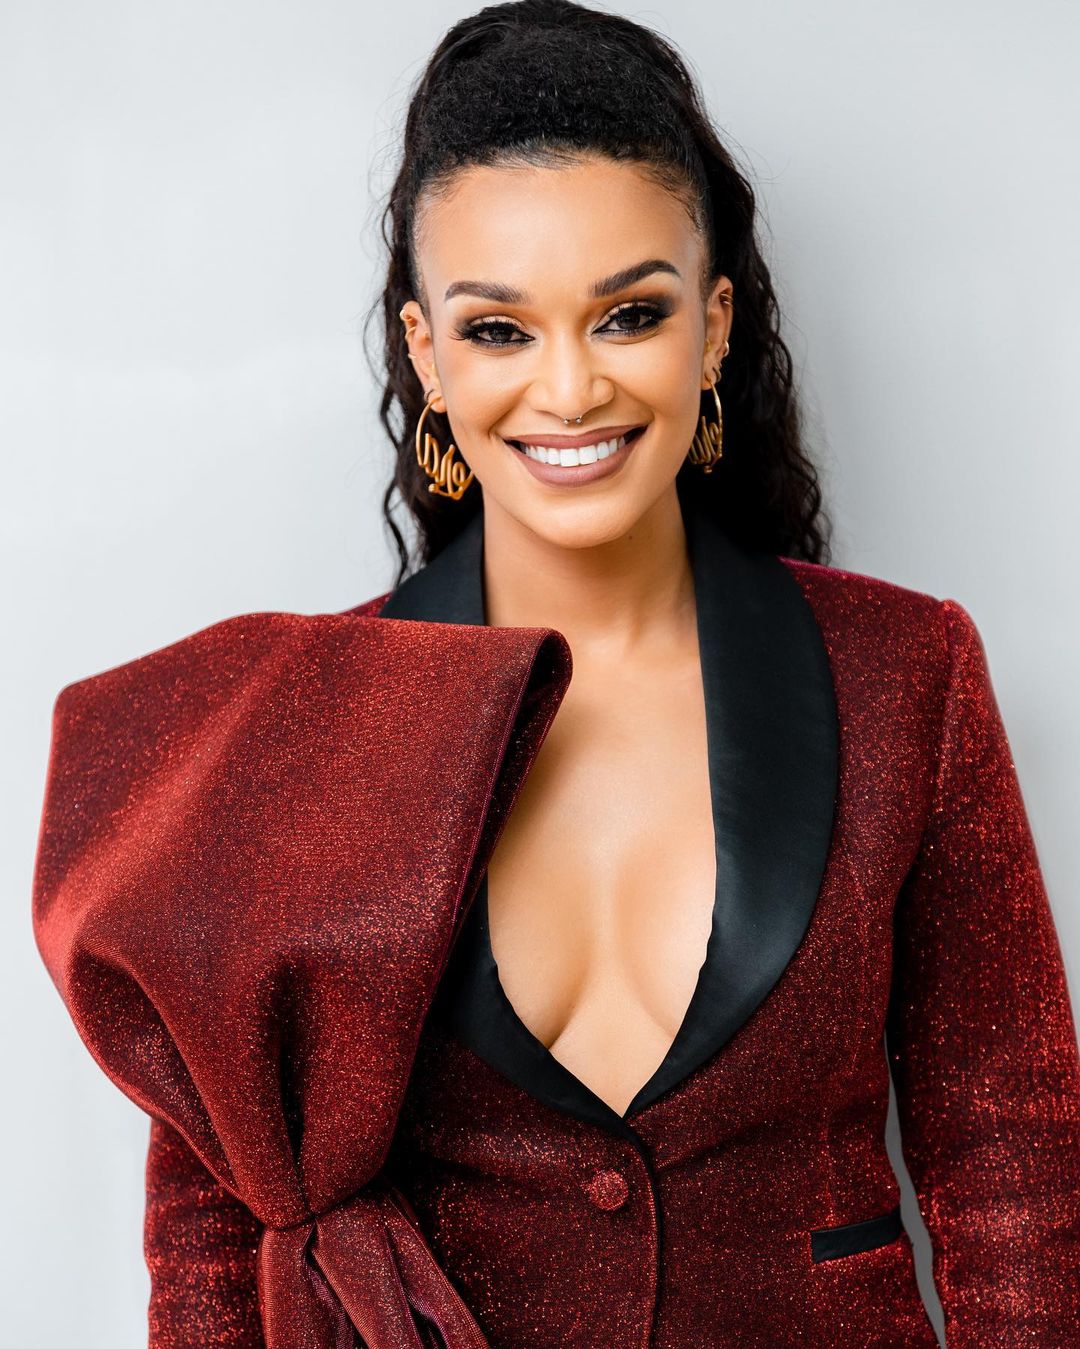 Pearl Thusi melts the hearts of Mzansi by agreeing to go on a date with Mr Smeg